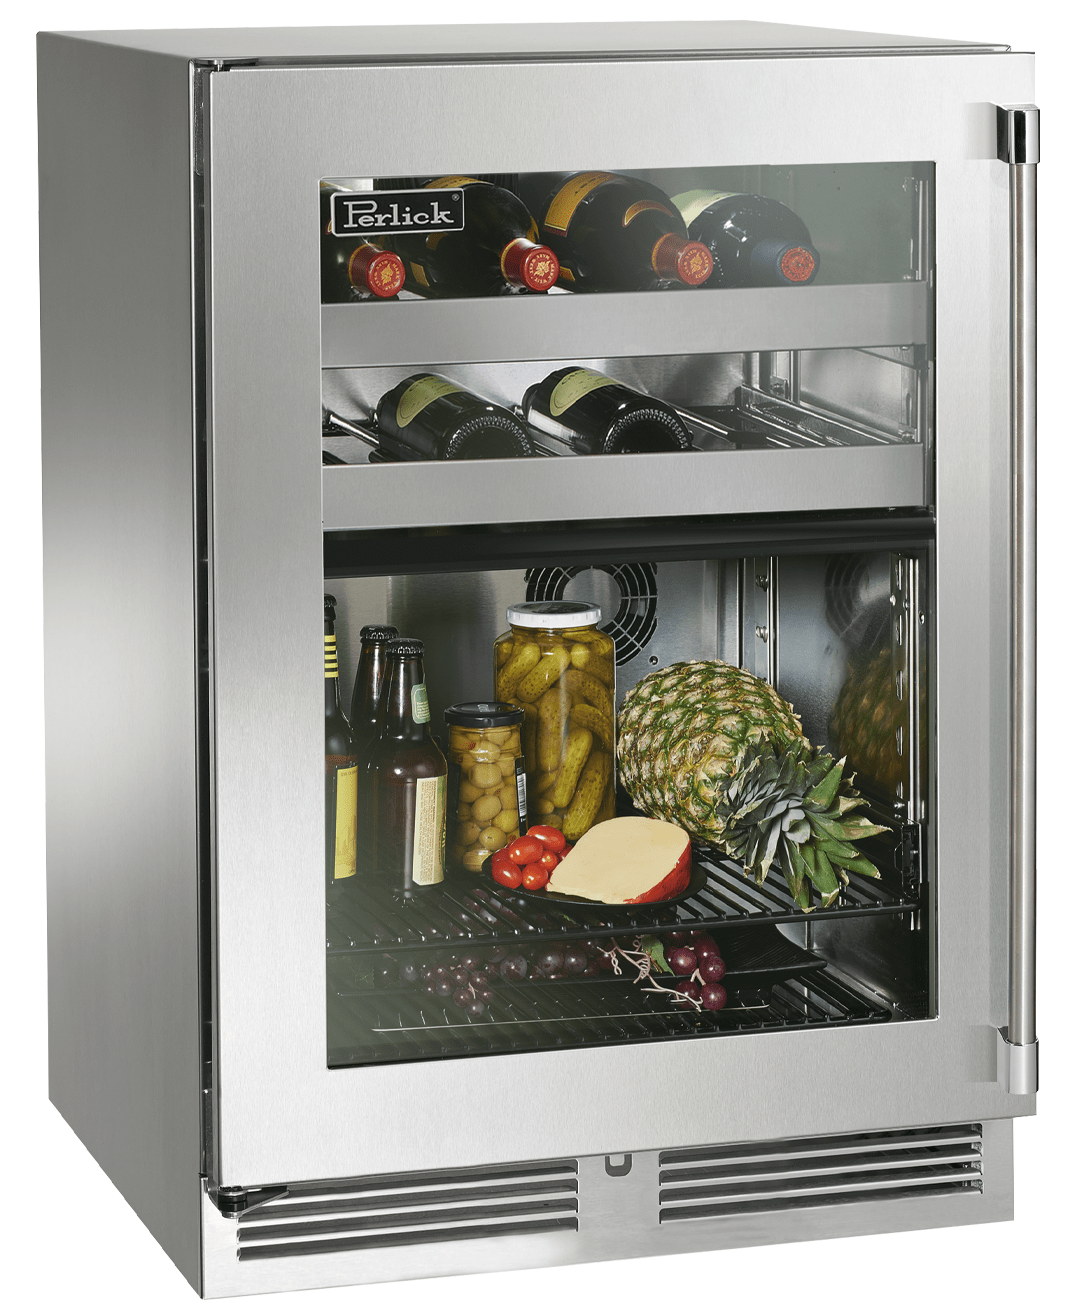 Perlick Refrigeration + Cooling Stainless Steel Glass Door - Left Hinge Perlick 24&quot; Signature Series Dual-Zone Outdoor Refrigerator/Wine Reserve | HP24CO-4